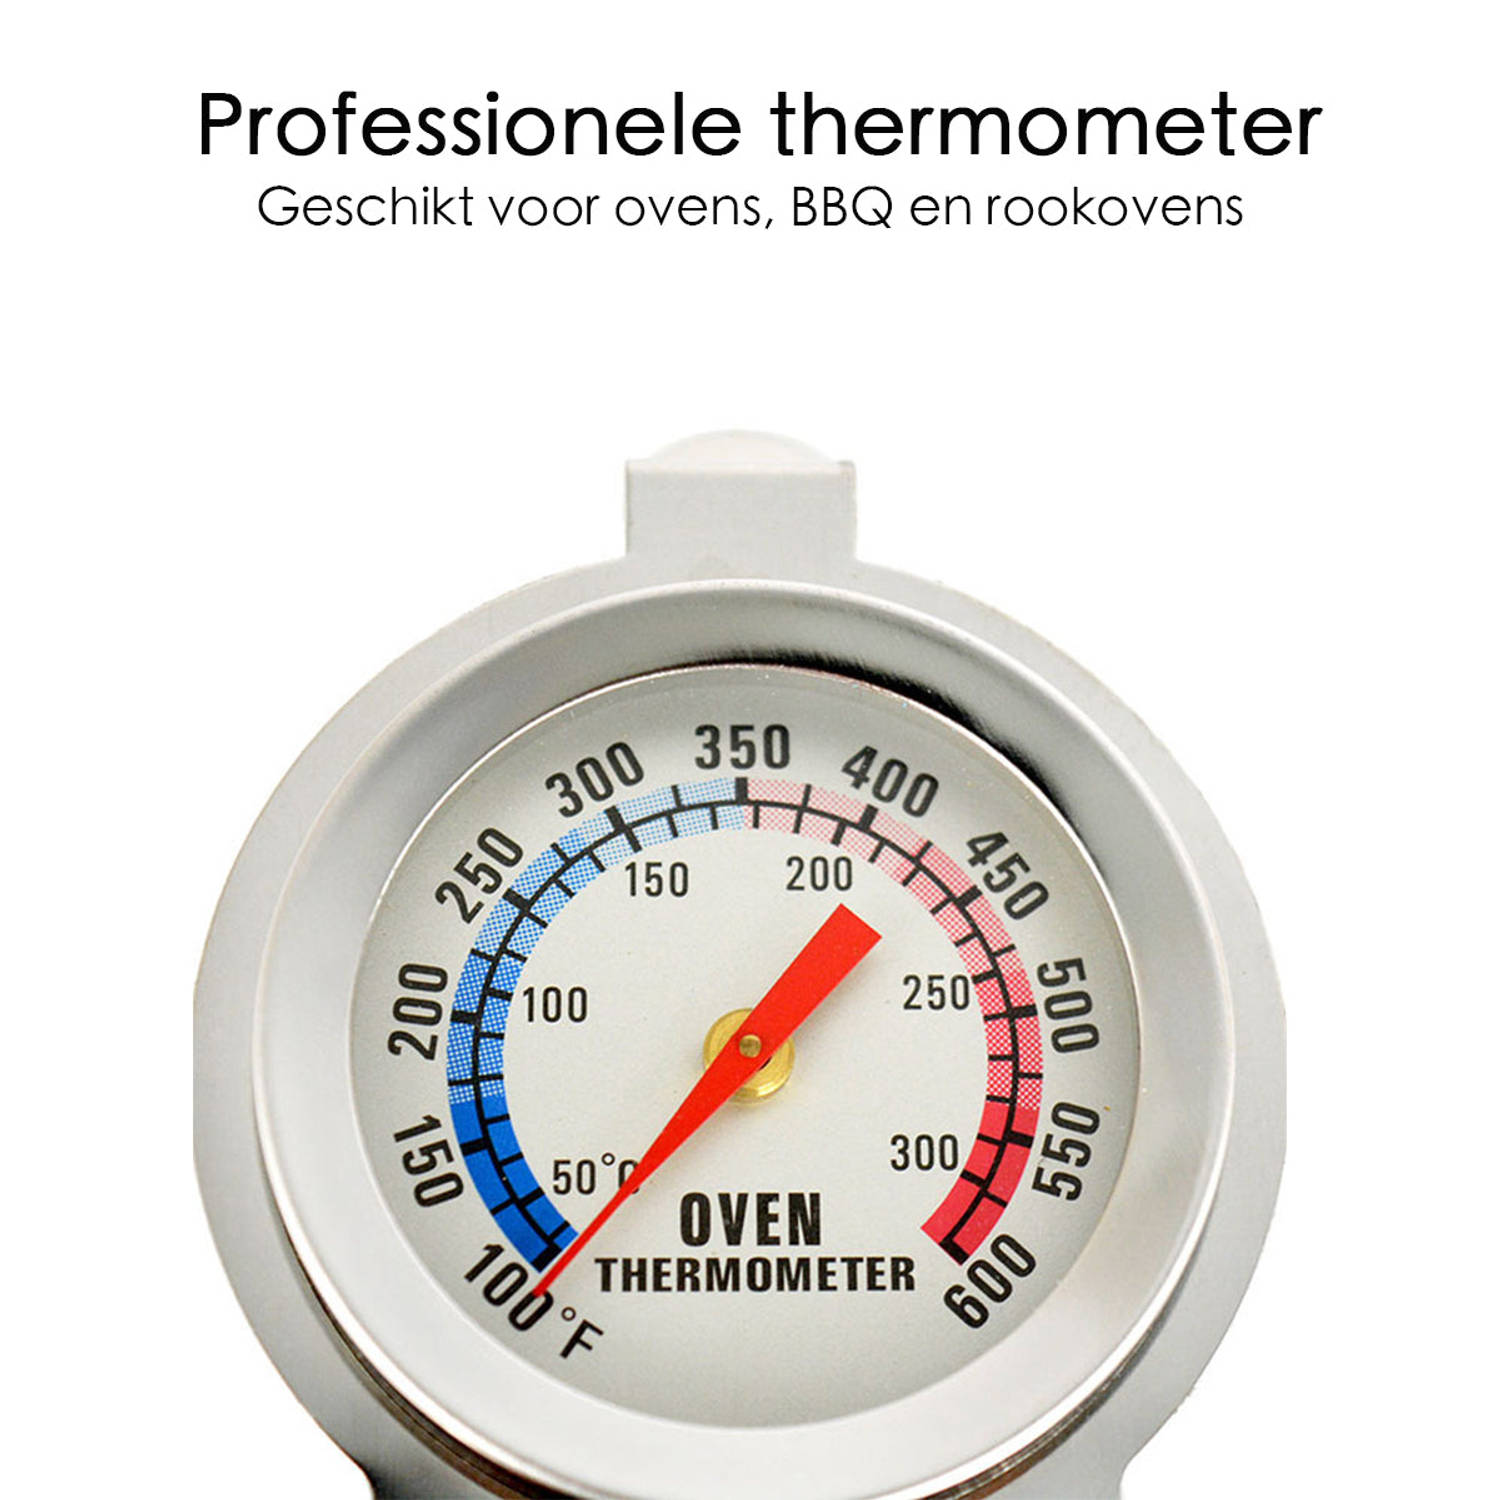 ondeugd kathedraal Bende Oventhermometer - Thermometer Oven - Rookoven Temperatuurmeter | Blokker